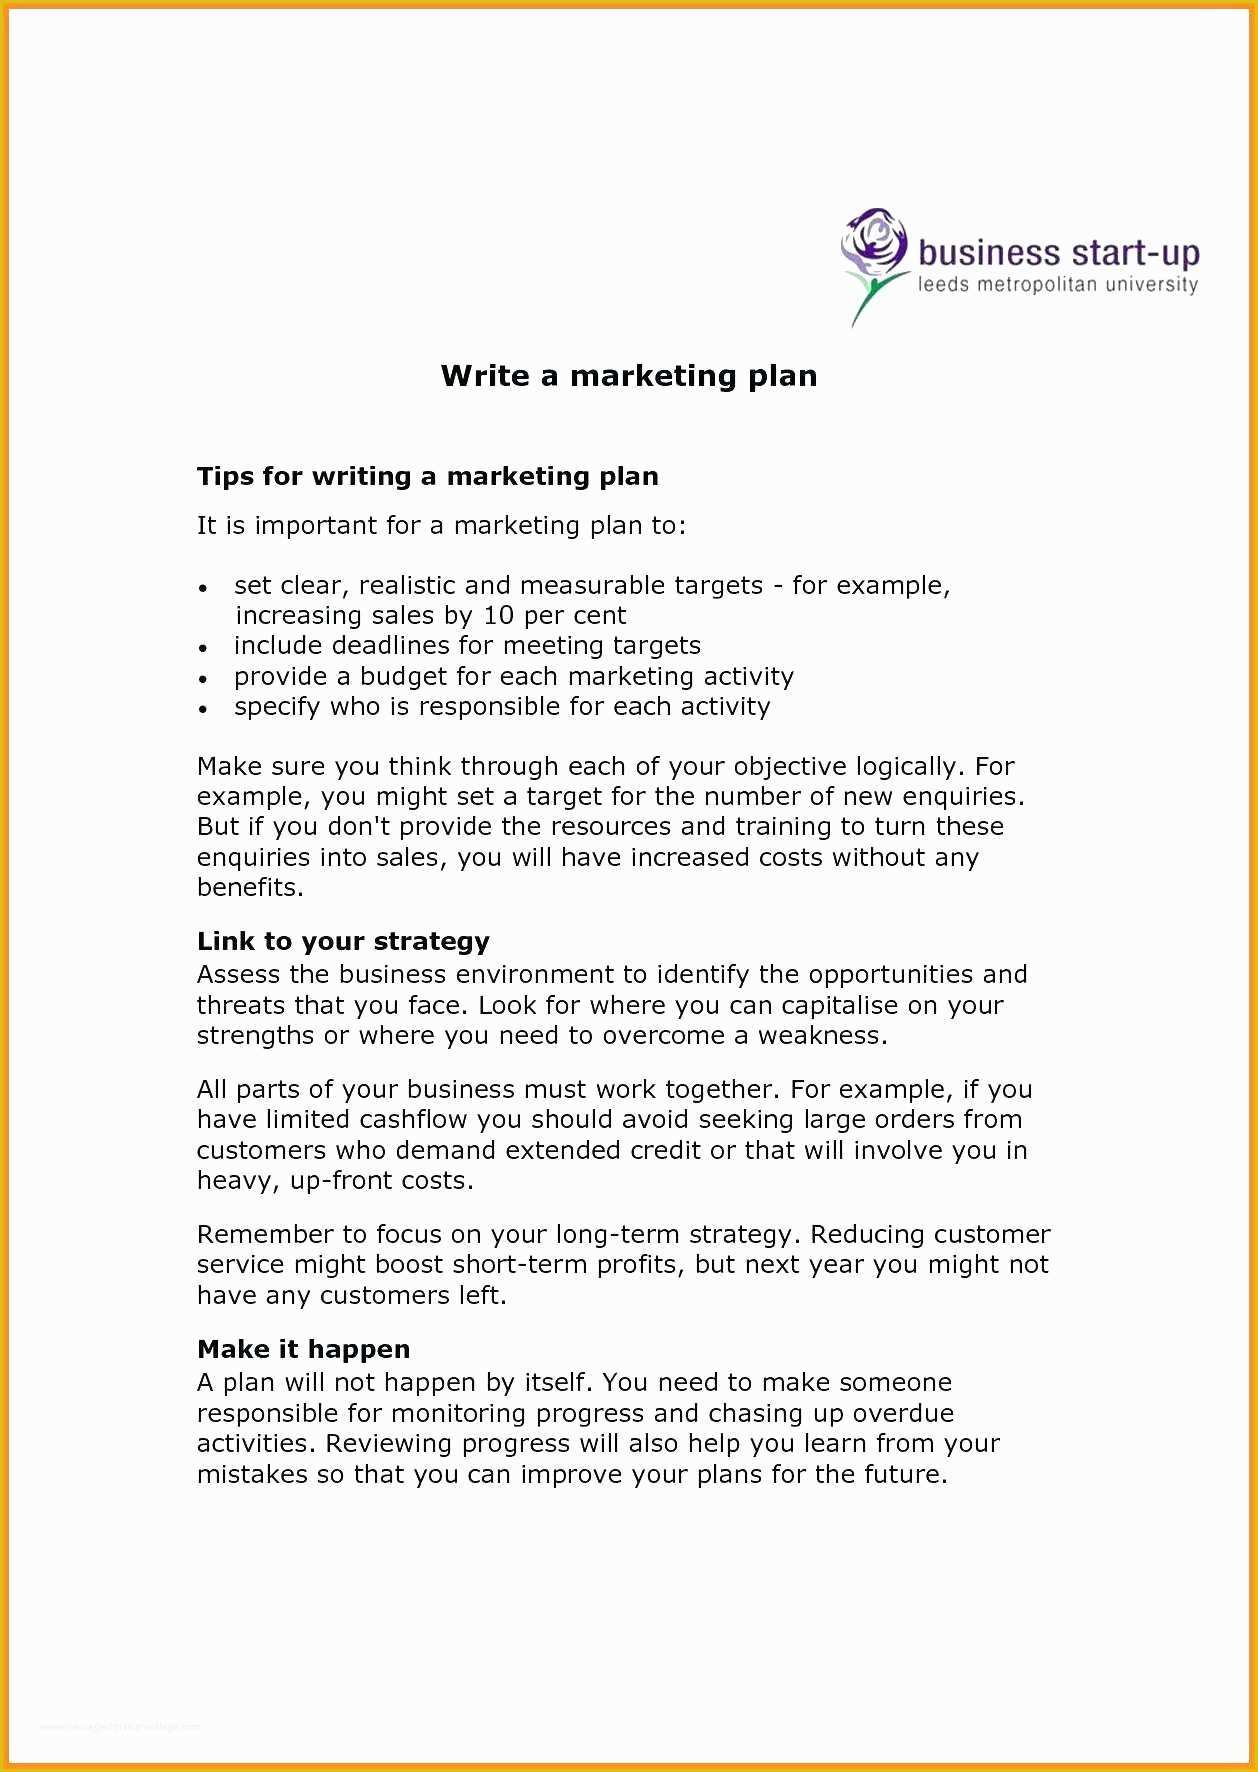 Quick Business Plan Template Free Of Fast Food Business Plans Free Examples Plans soul Food